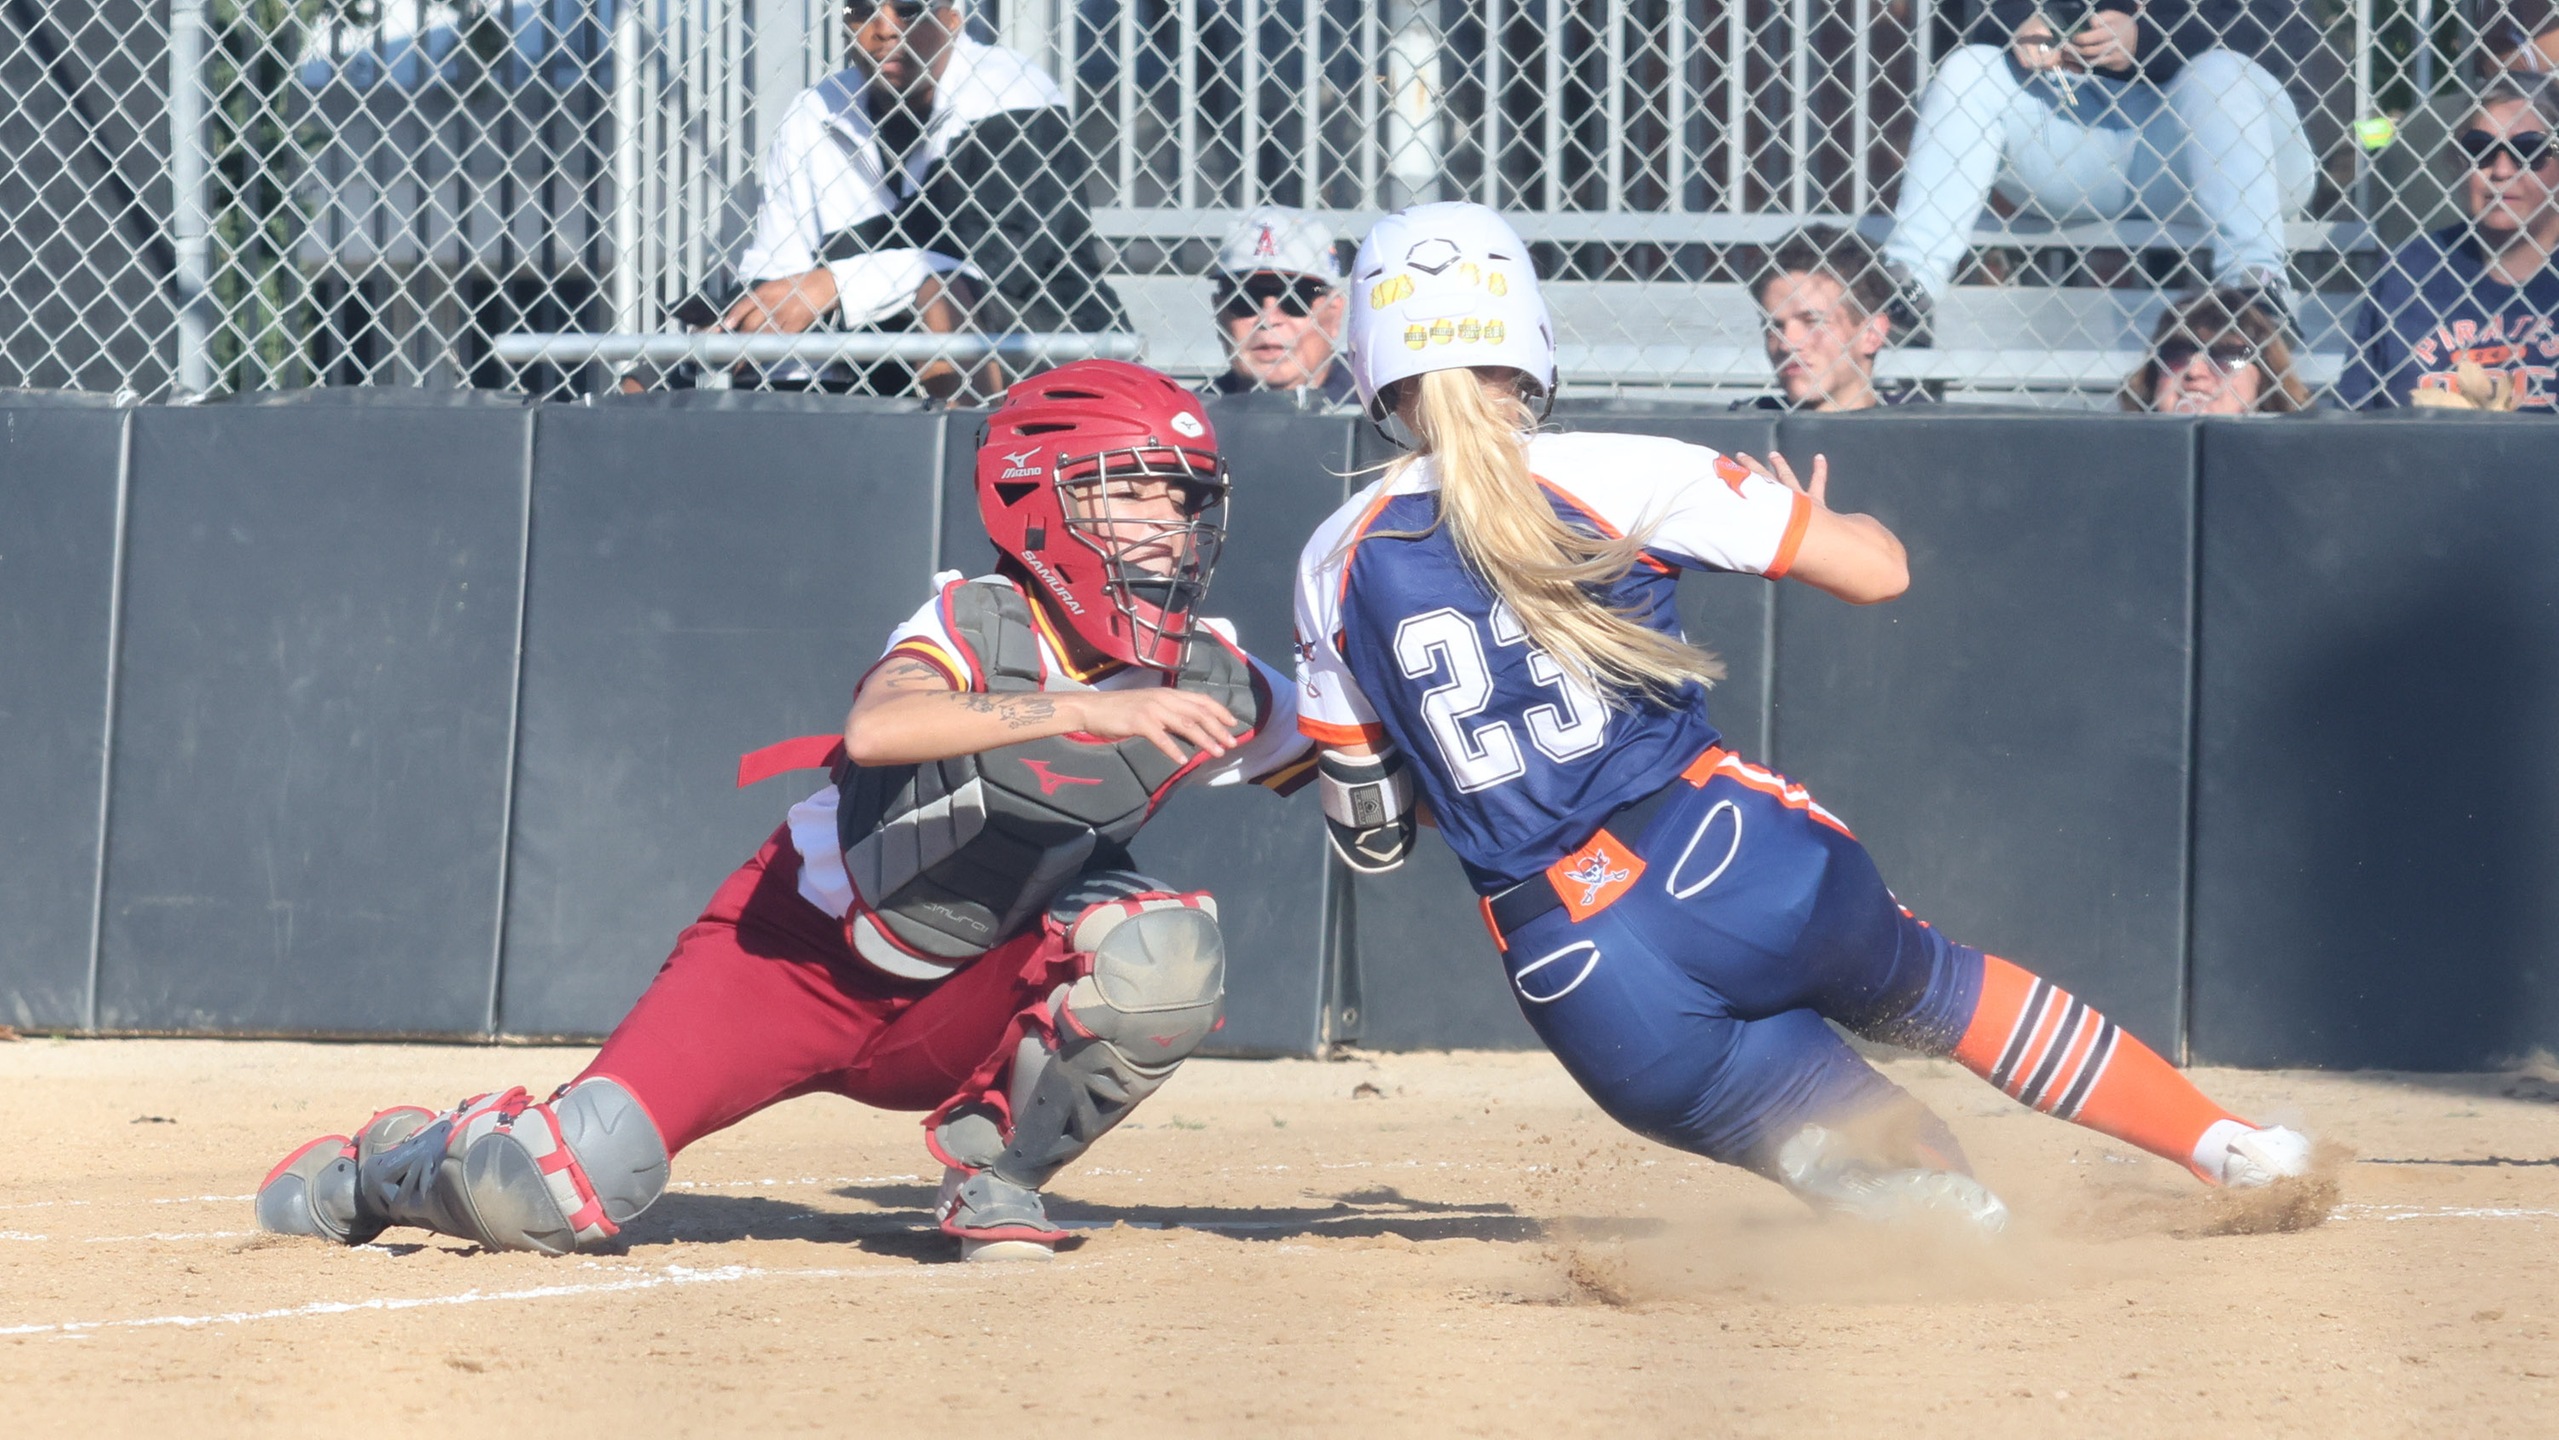 Jennie Chacon places the tag at home during PCC's win over Orange Coast on Monday (photo by Richard Quinton).